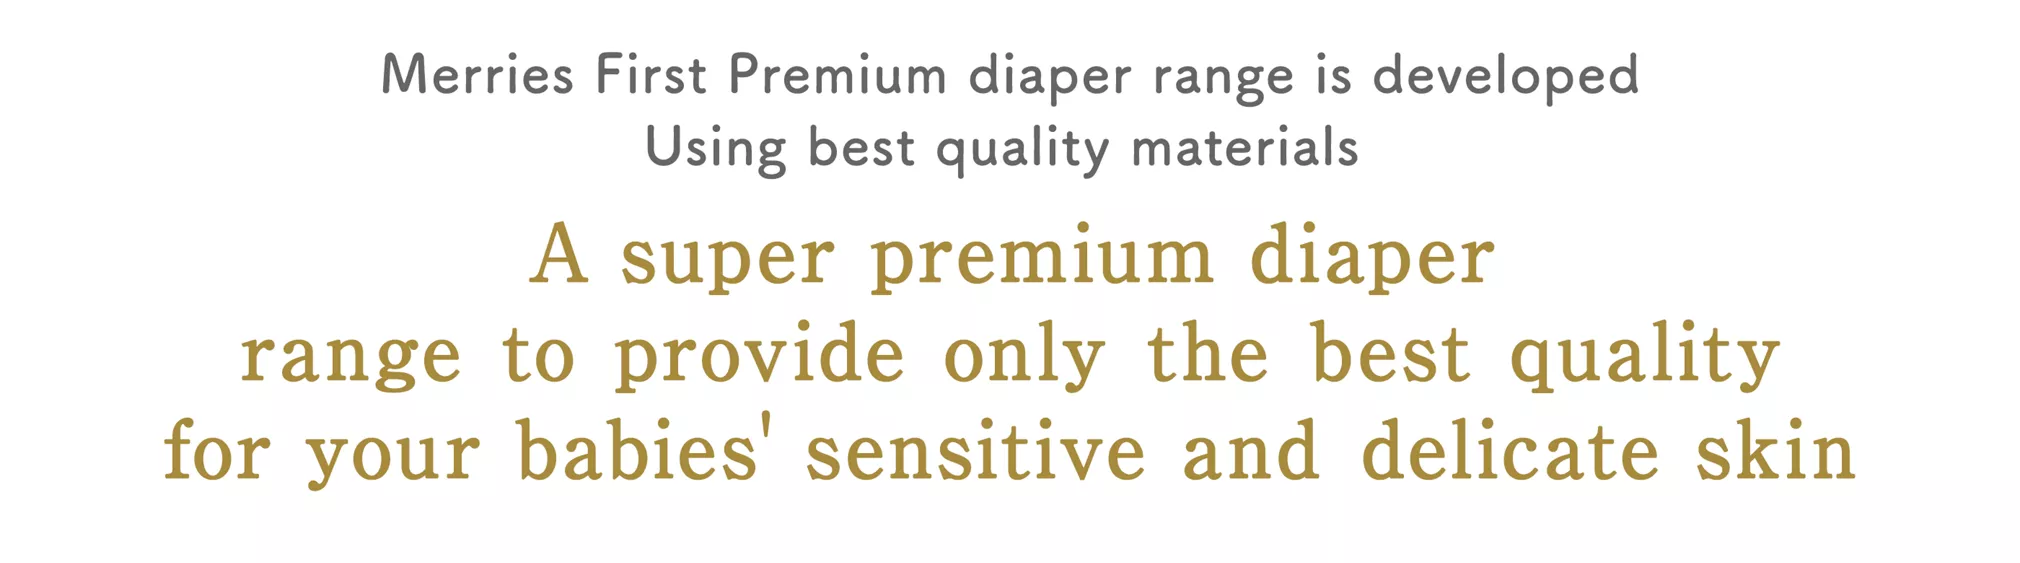 Merries First Premium diaper range is developed Using best quality materials. A super premium diaper range to provide only the best quality for your babies' sensitive and delicate skin